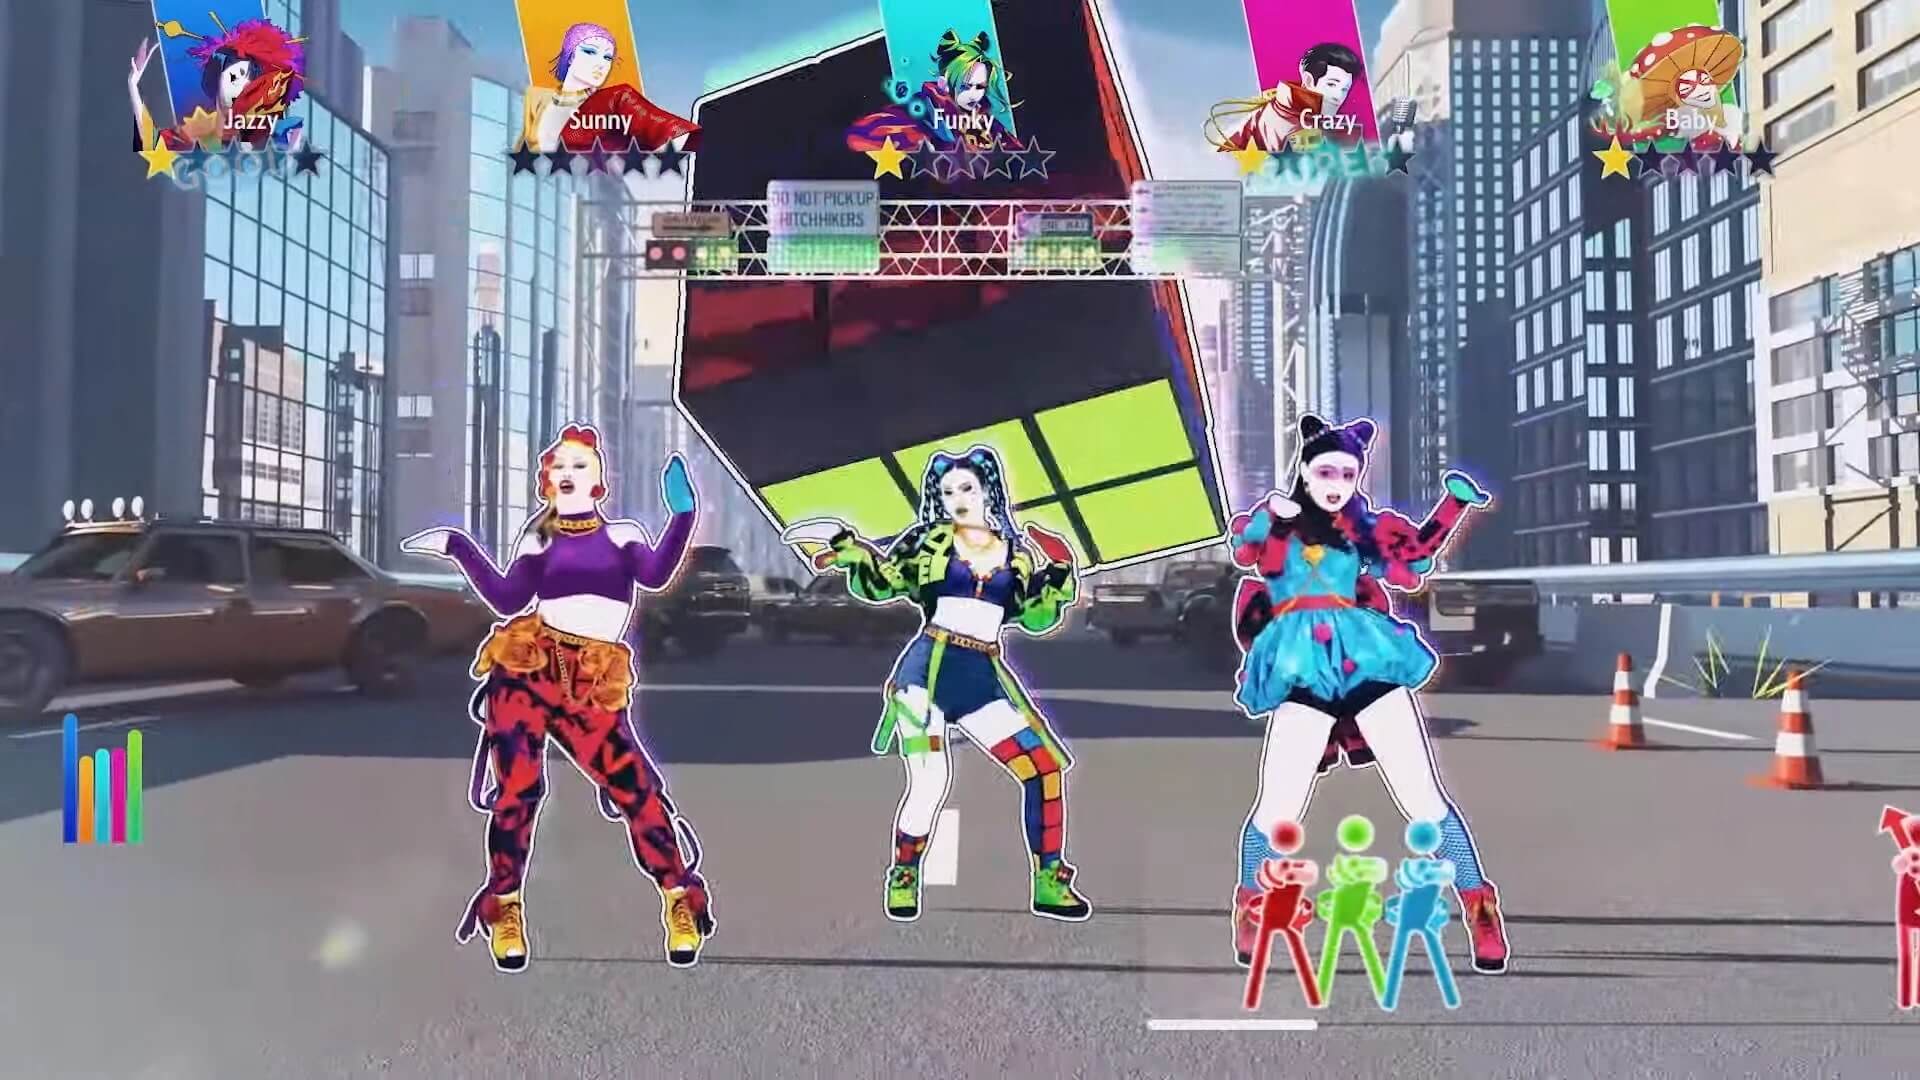 Just Dance is a fun party game, but it shouldn't have been selected for the Olympics.